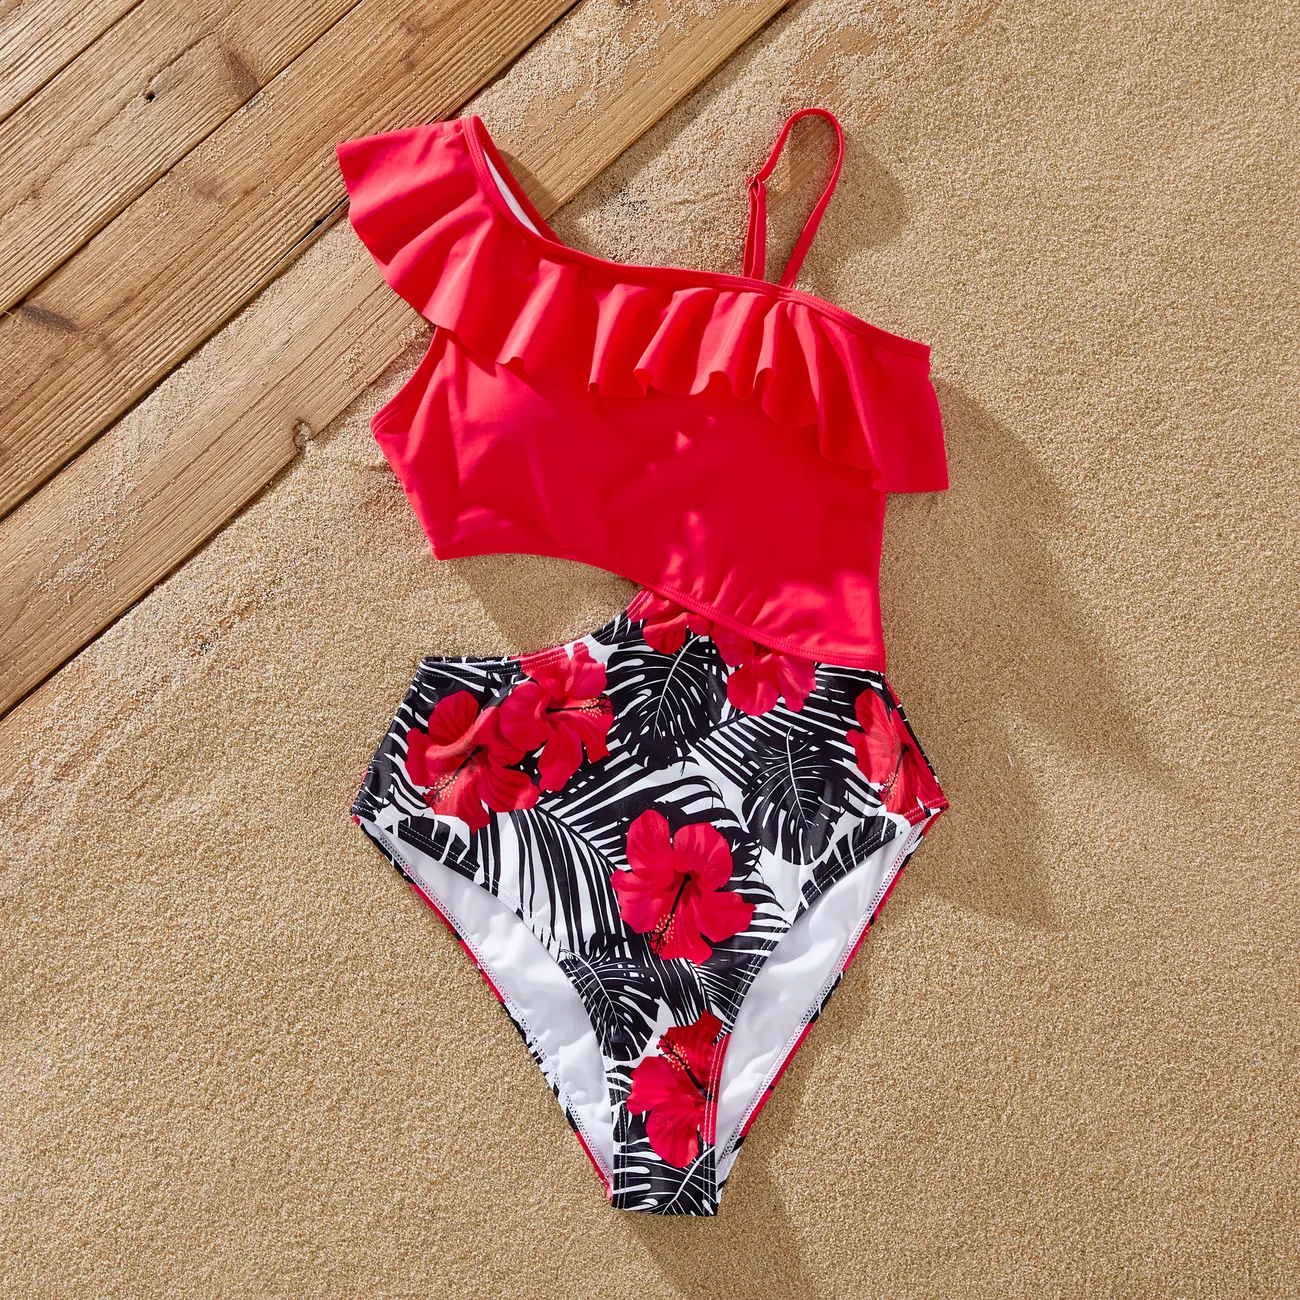 Family Matching Drawstring Swim Trunks or Red Floral Cut Out Ruffle One-Piece Swimsuit Dark -Pink big image 1